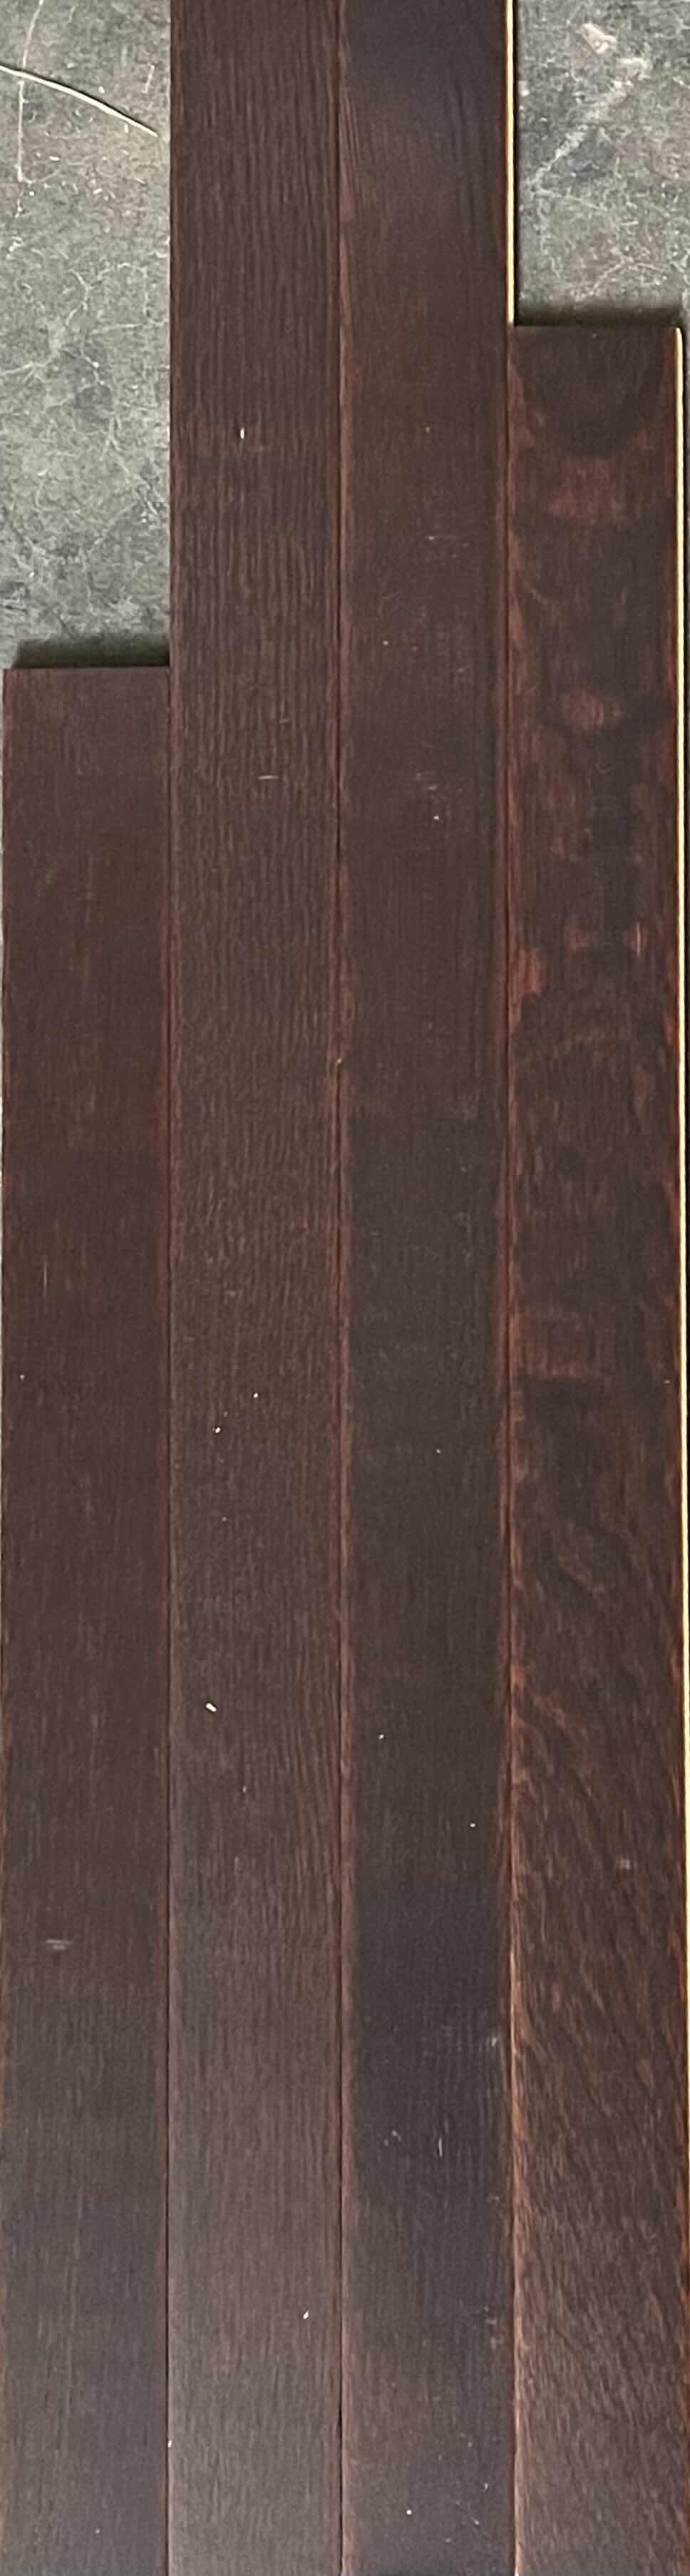 Photo 1 of ARMSTRONG WINEMAKER HARVEST WOOD FINISH GLUE DOWN SOLID OAK HARDWOOD PLANK FLOORING 2.25” X RANDOM LENGTH (40SQFT PER CASE/2CASES APPROX. 80SQFT TOTAL) READ NOTES